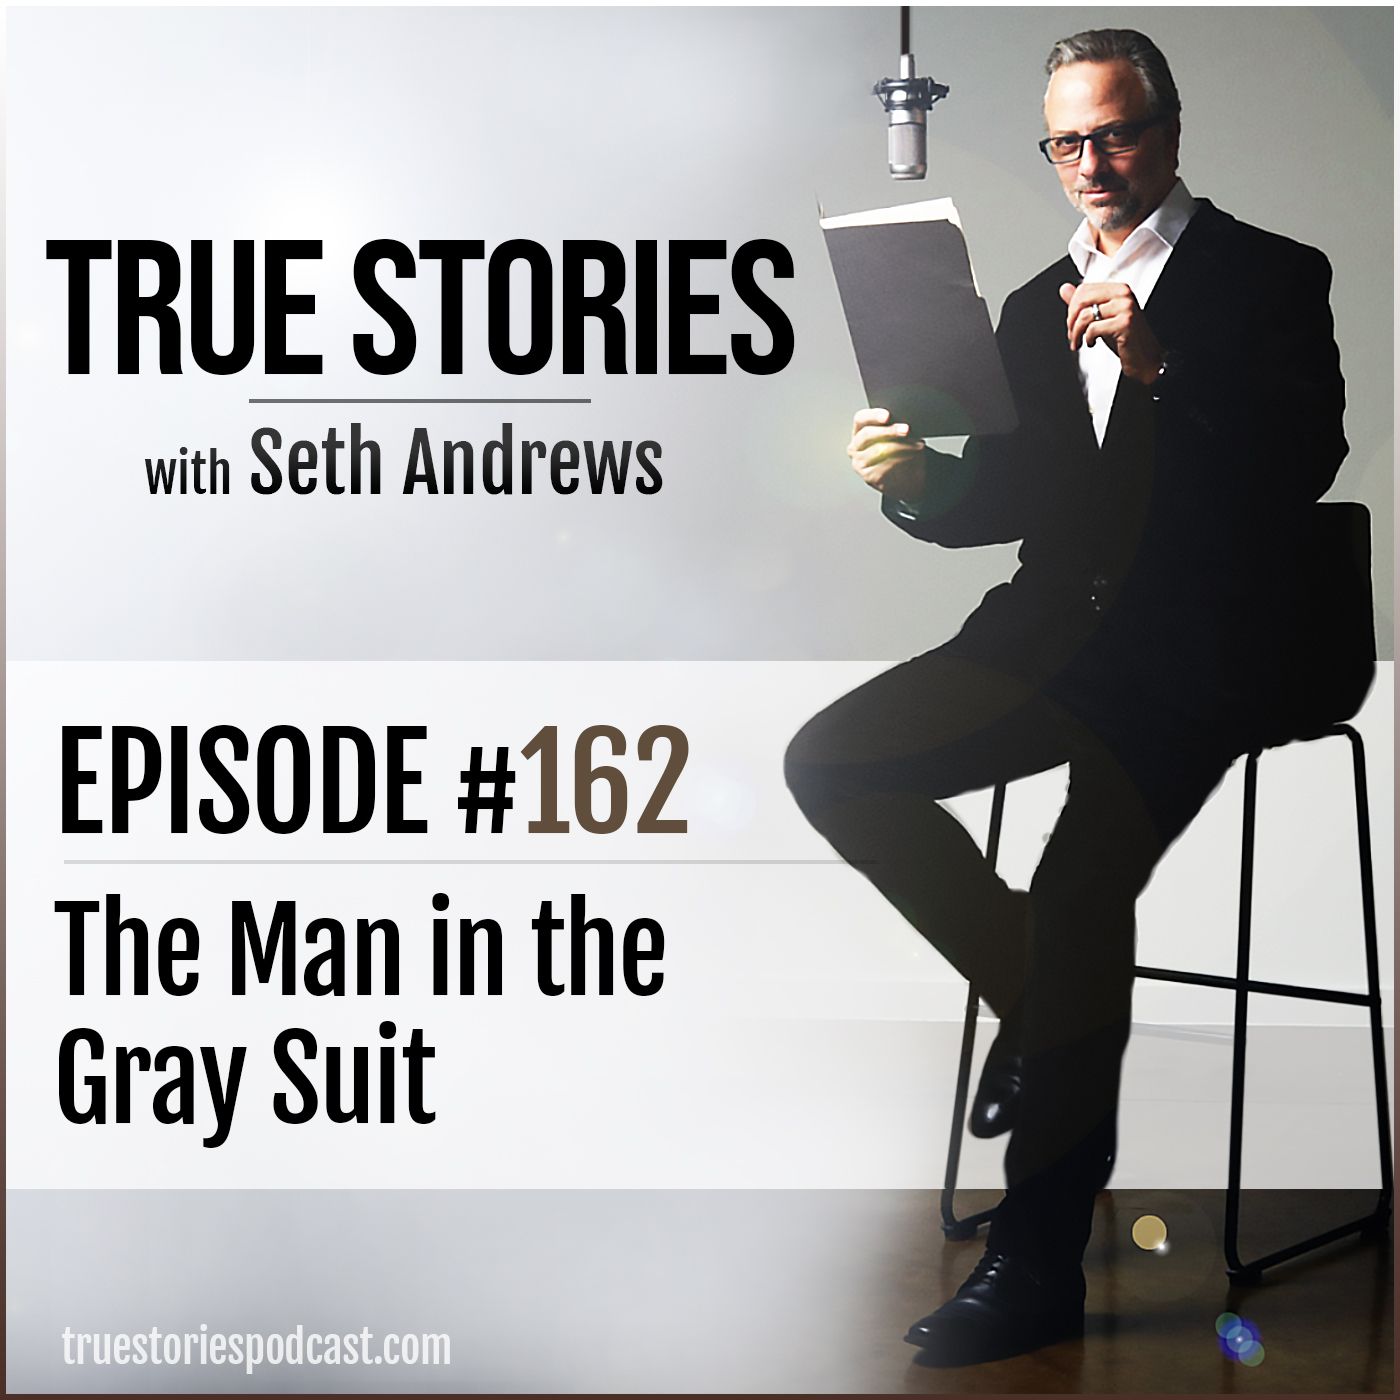 True Stories #162 - The Man in the Gray Suit